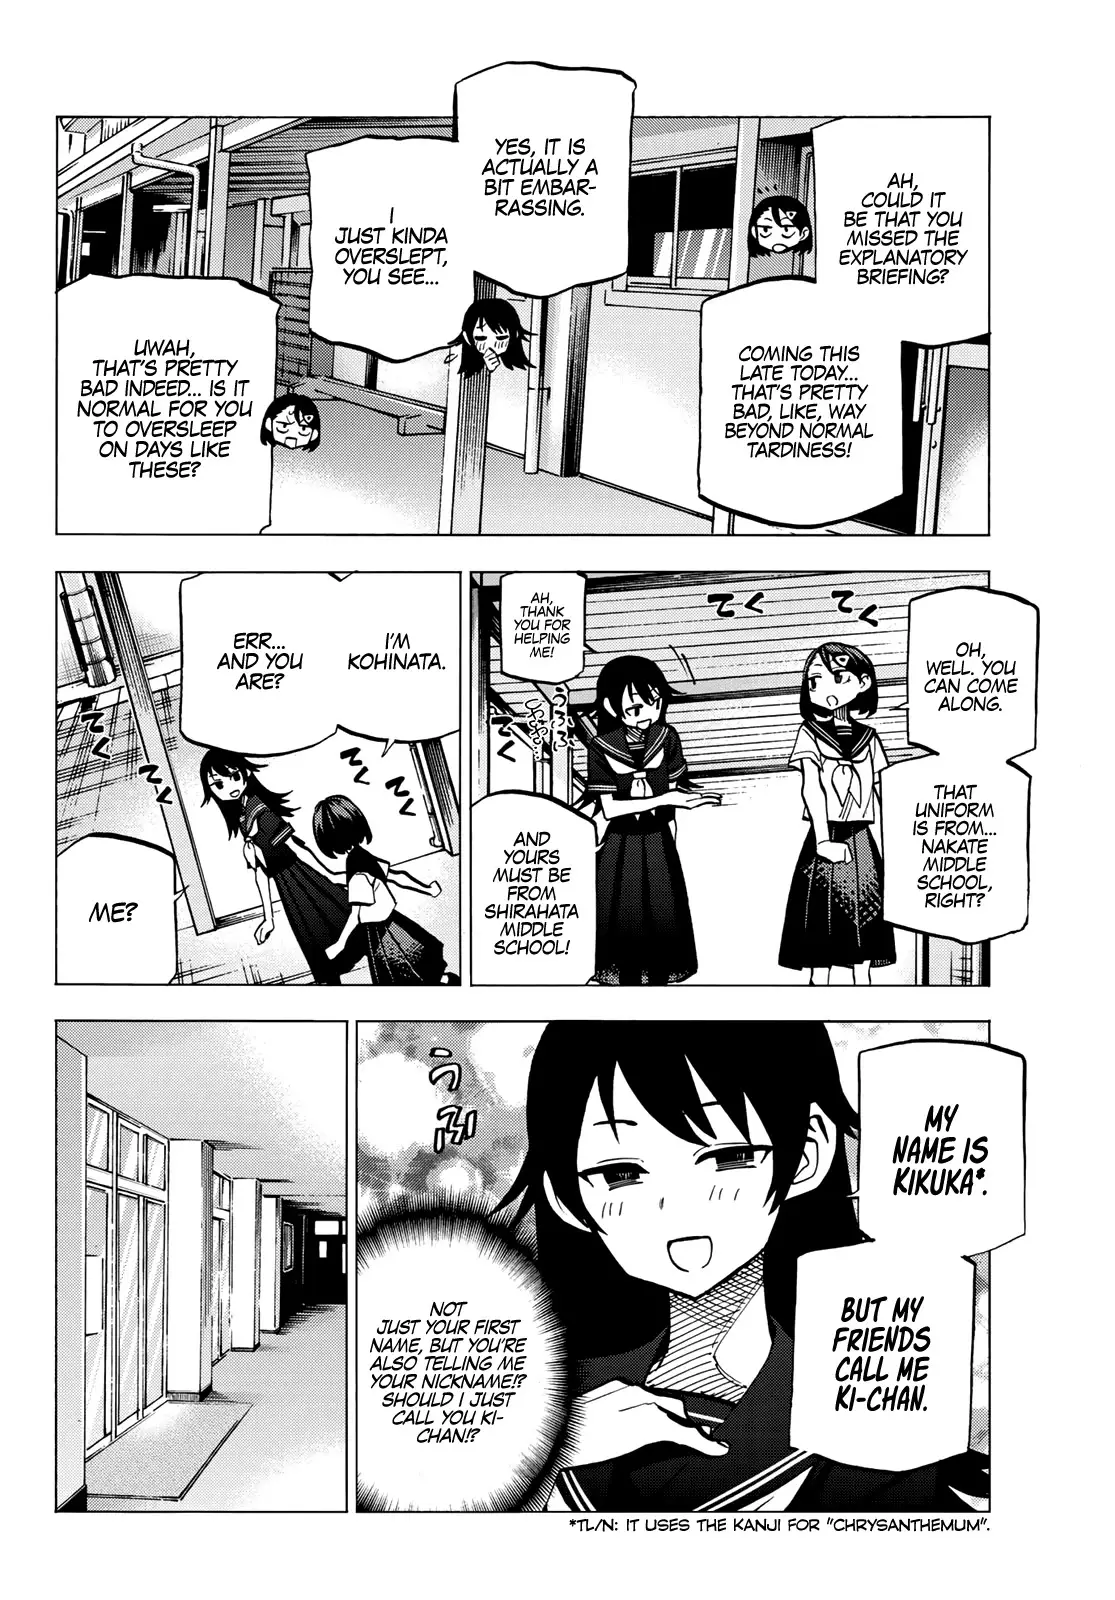 The Story Between A Dumb Prefect And A High School Girl With An Inappropriate Skirt Length - 11 page 7